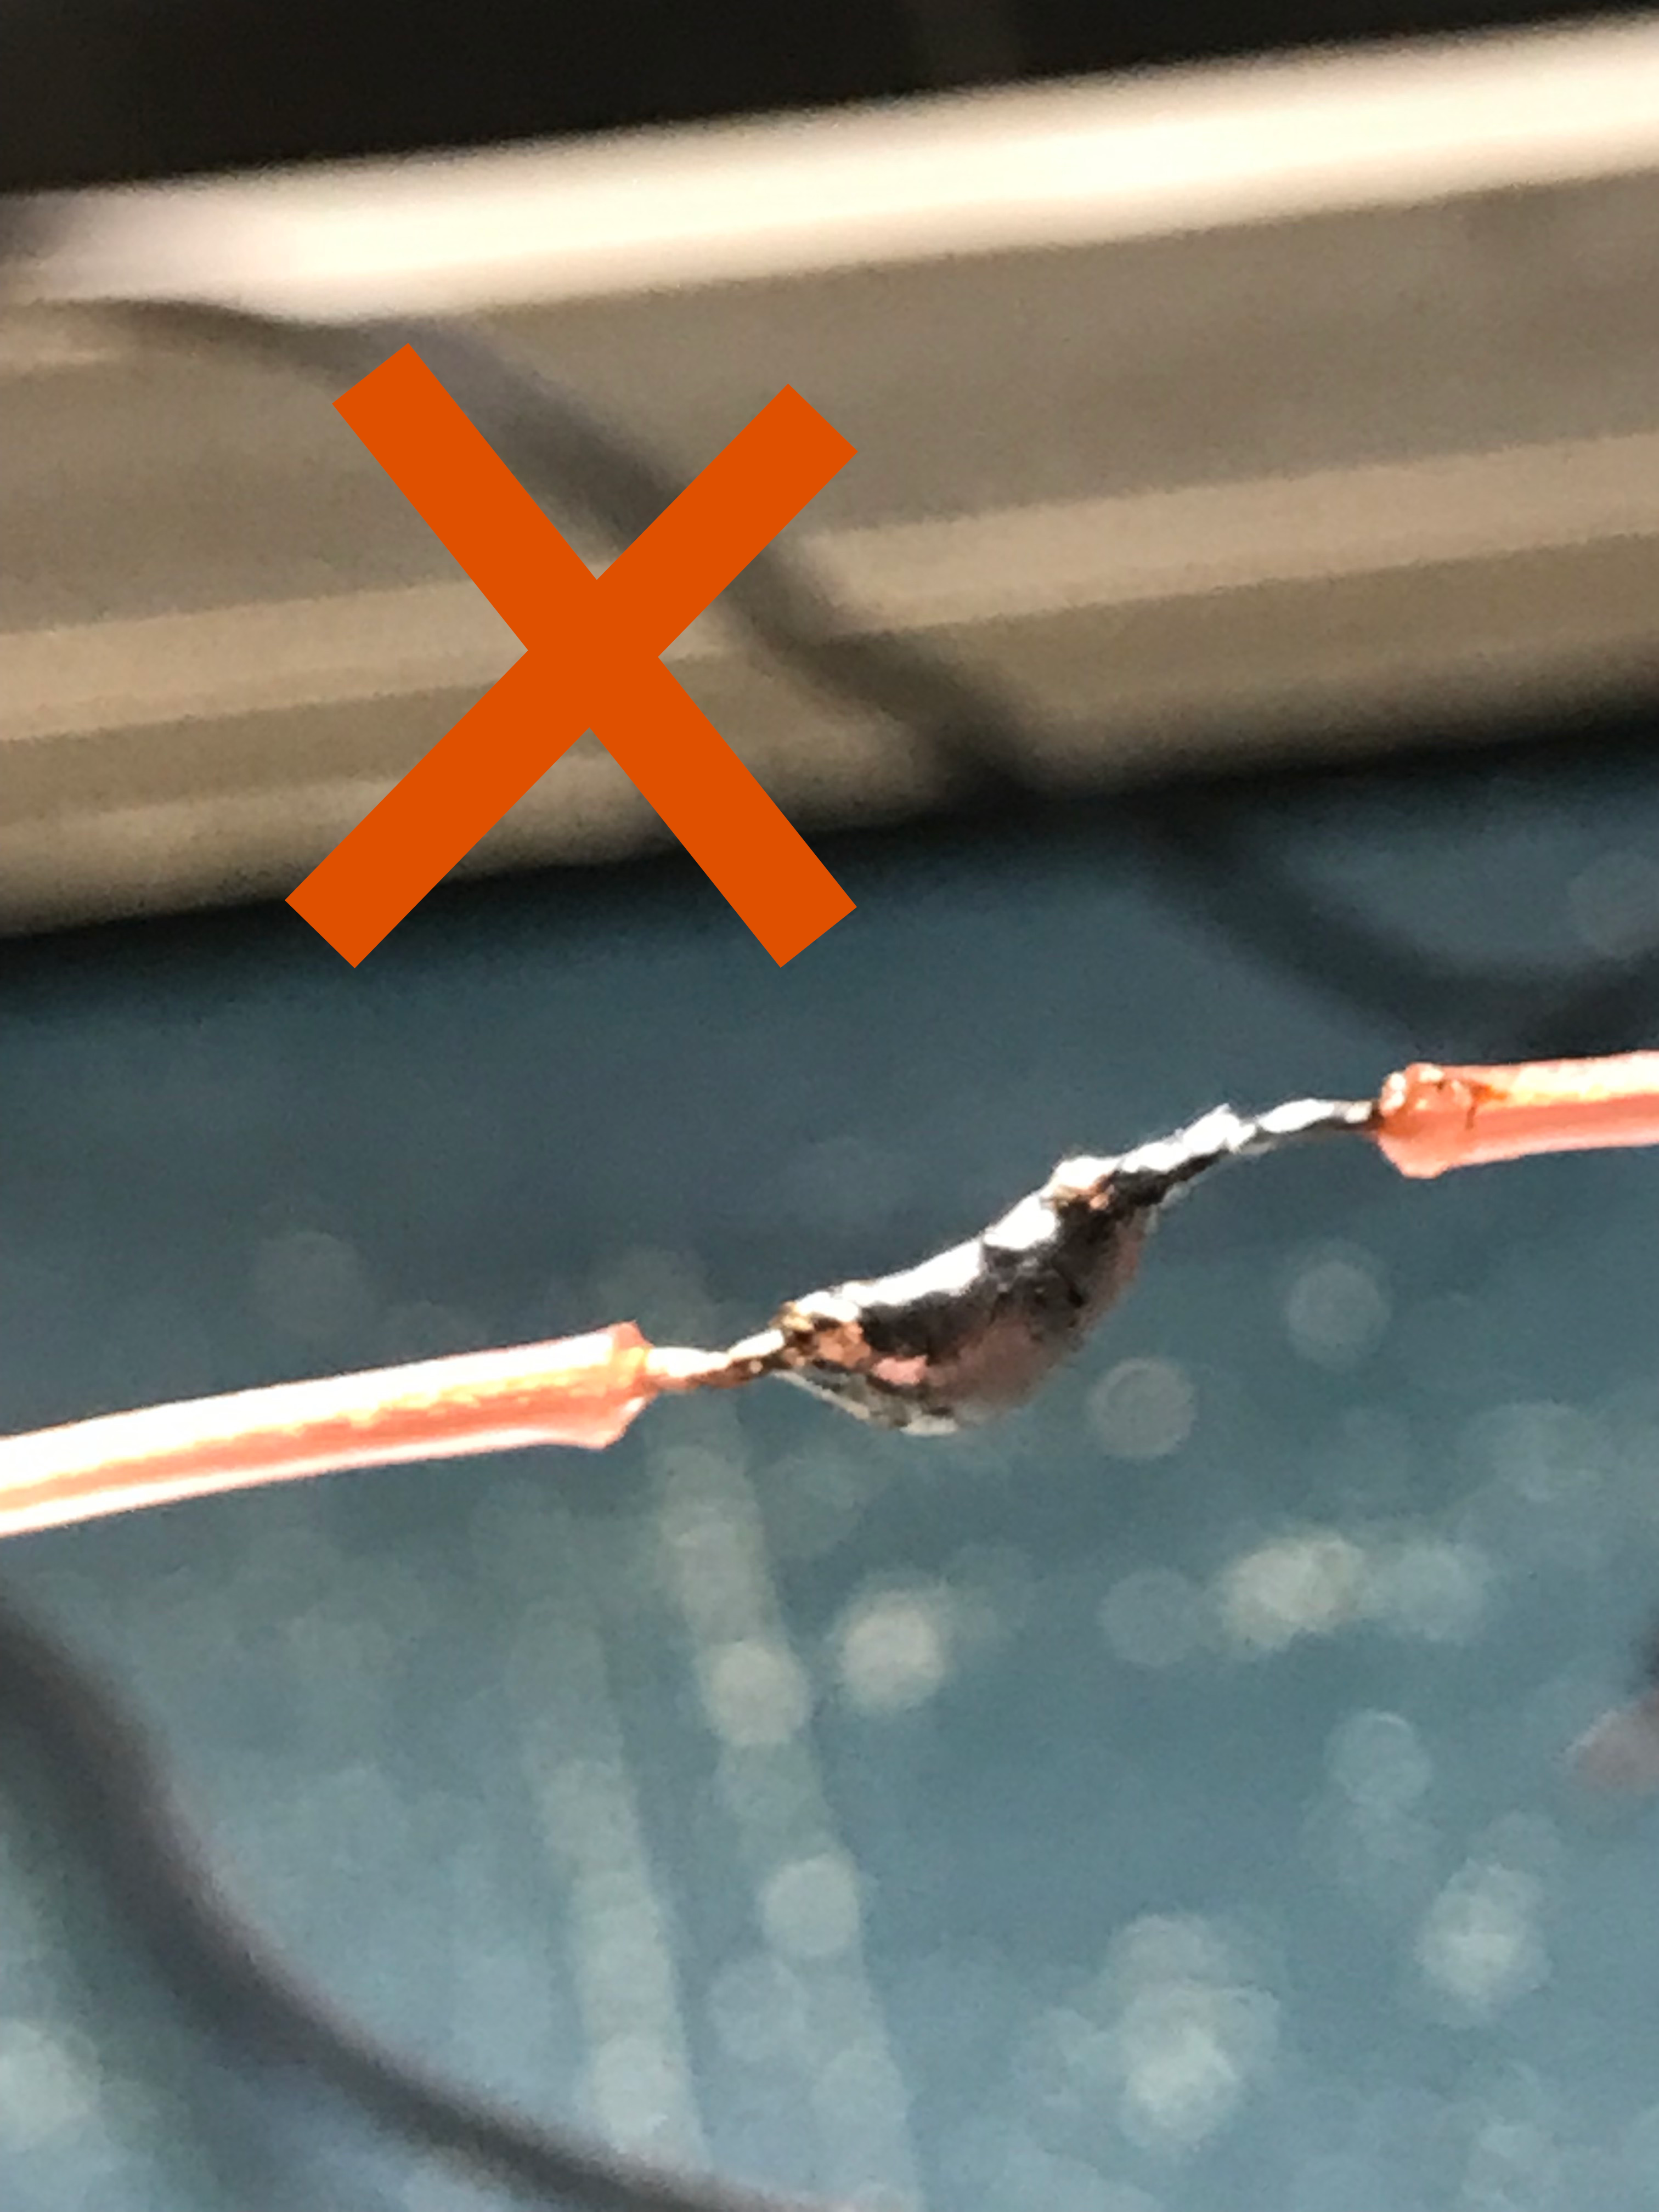 Example of bad solder joint